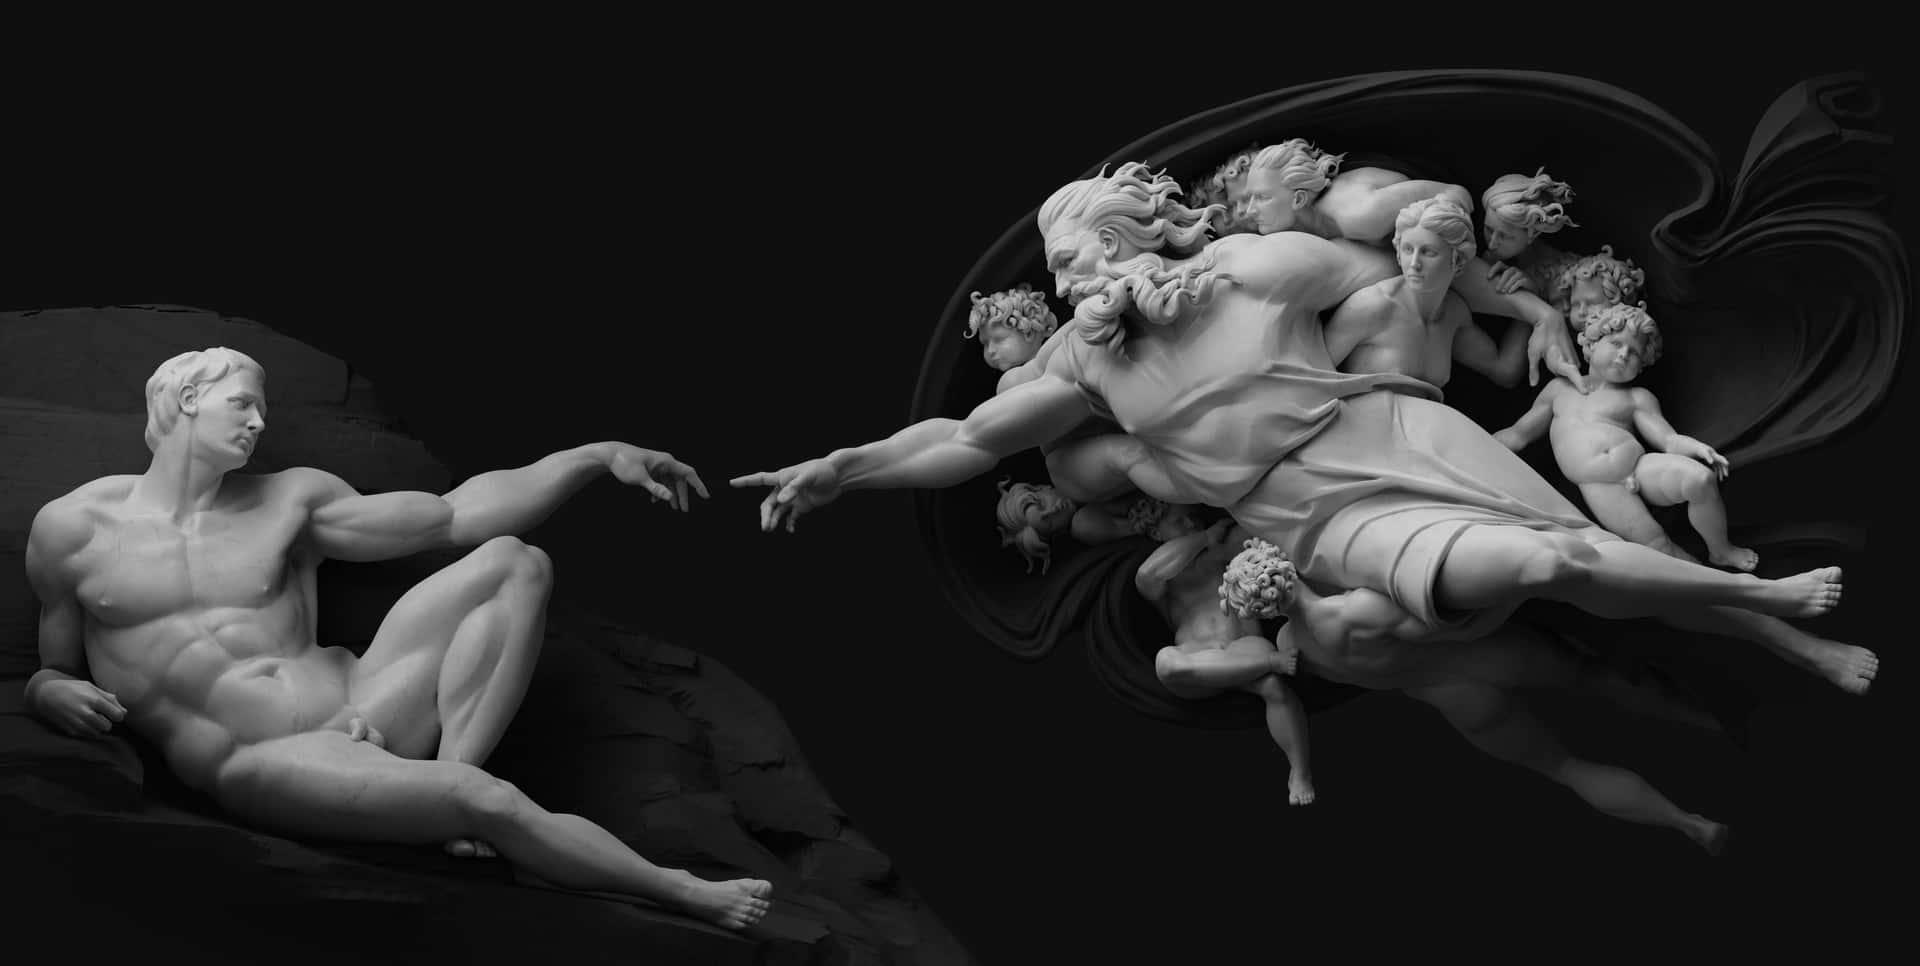 The Creation of Adam HD wallpaper  The creation of adam Painting wallpaper  Wallpaper